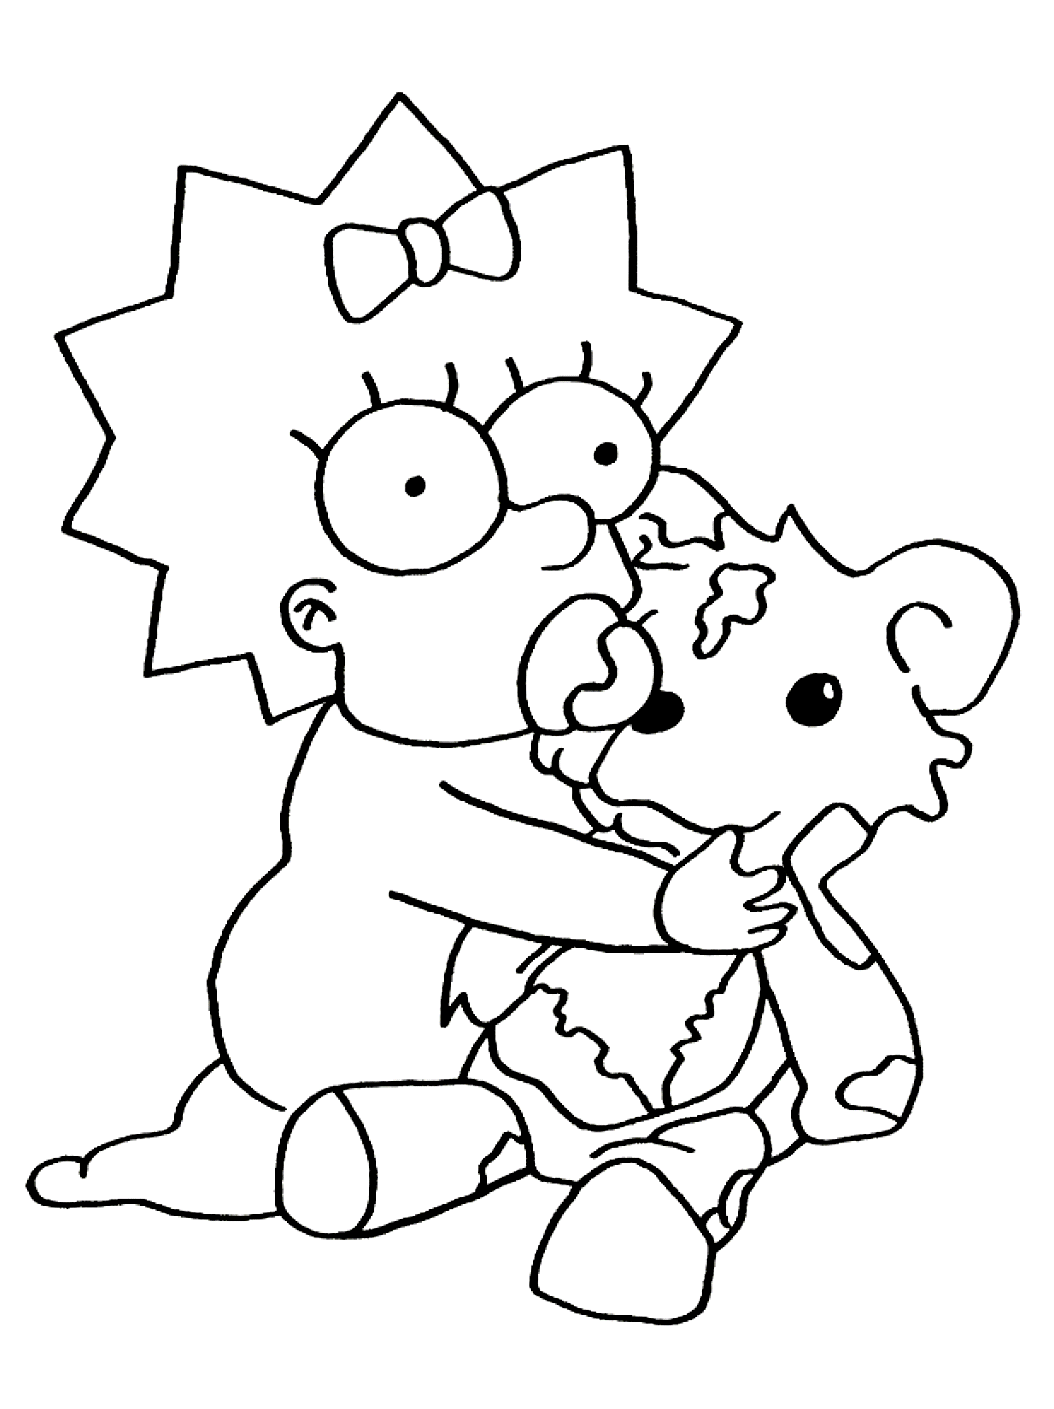 The Simpsons drawing to color, easy for kids